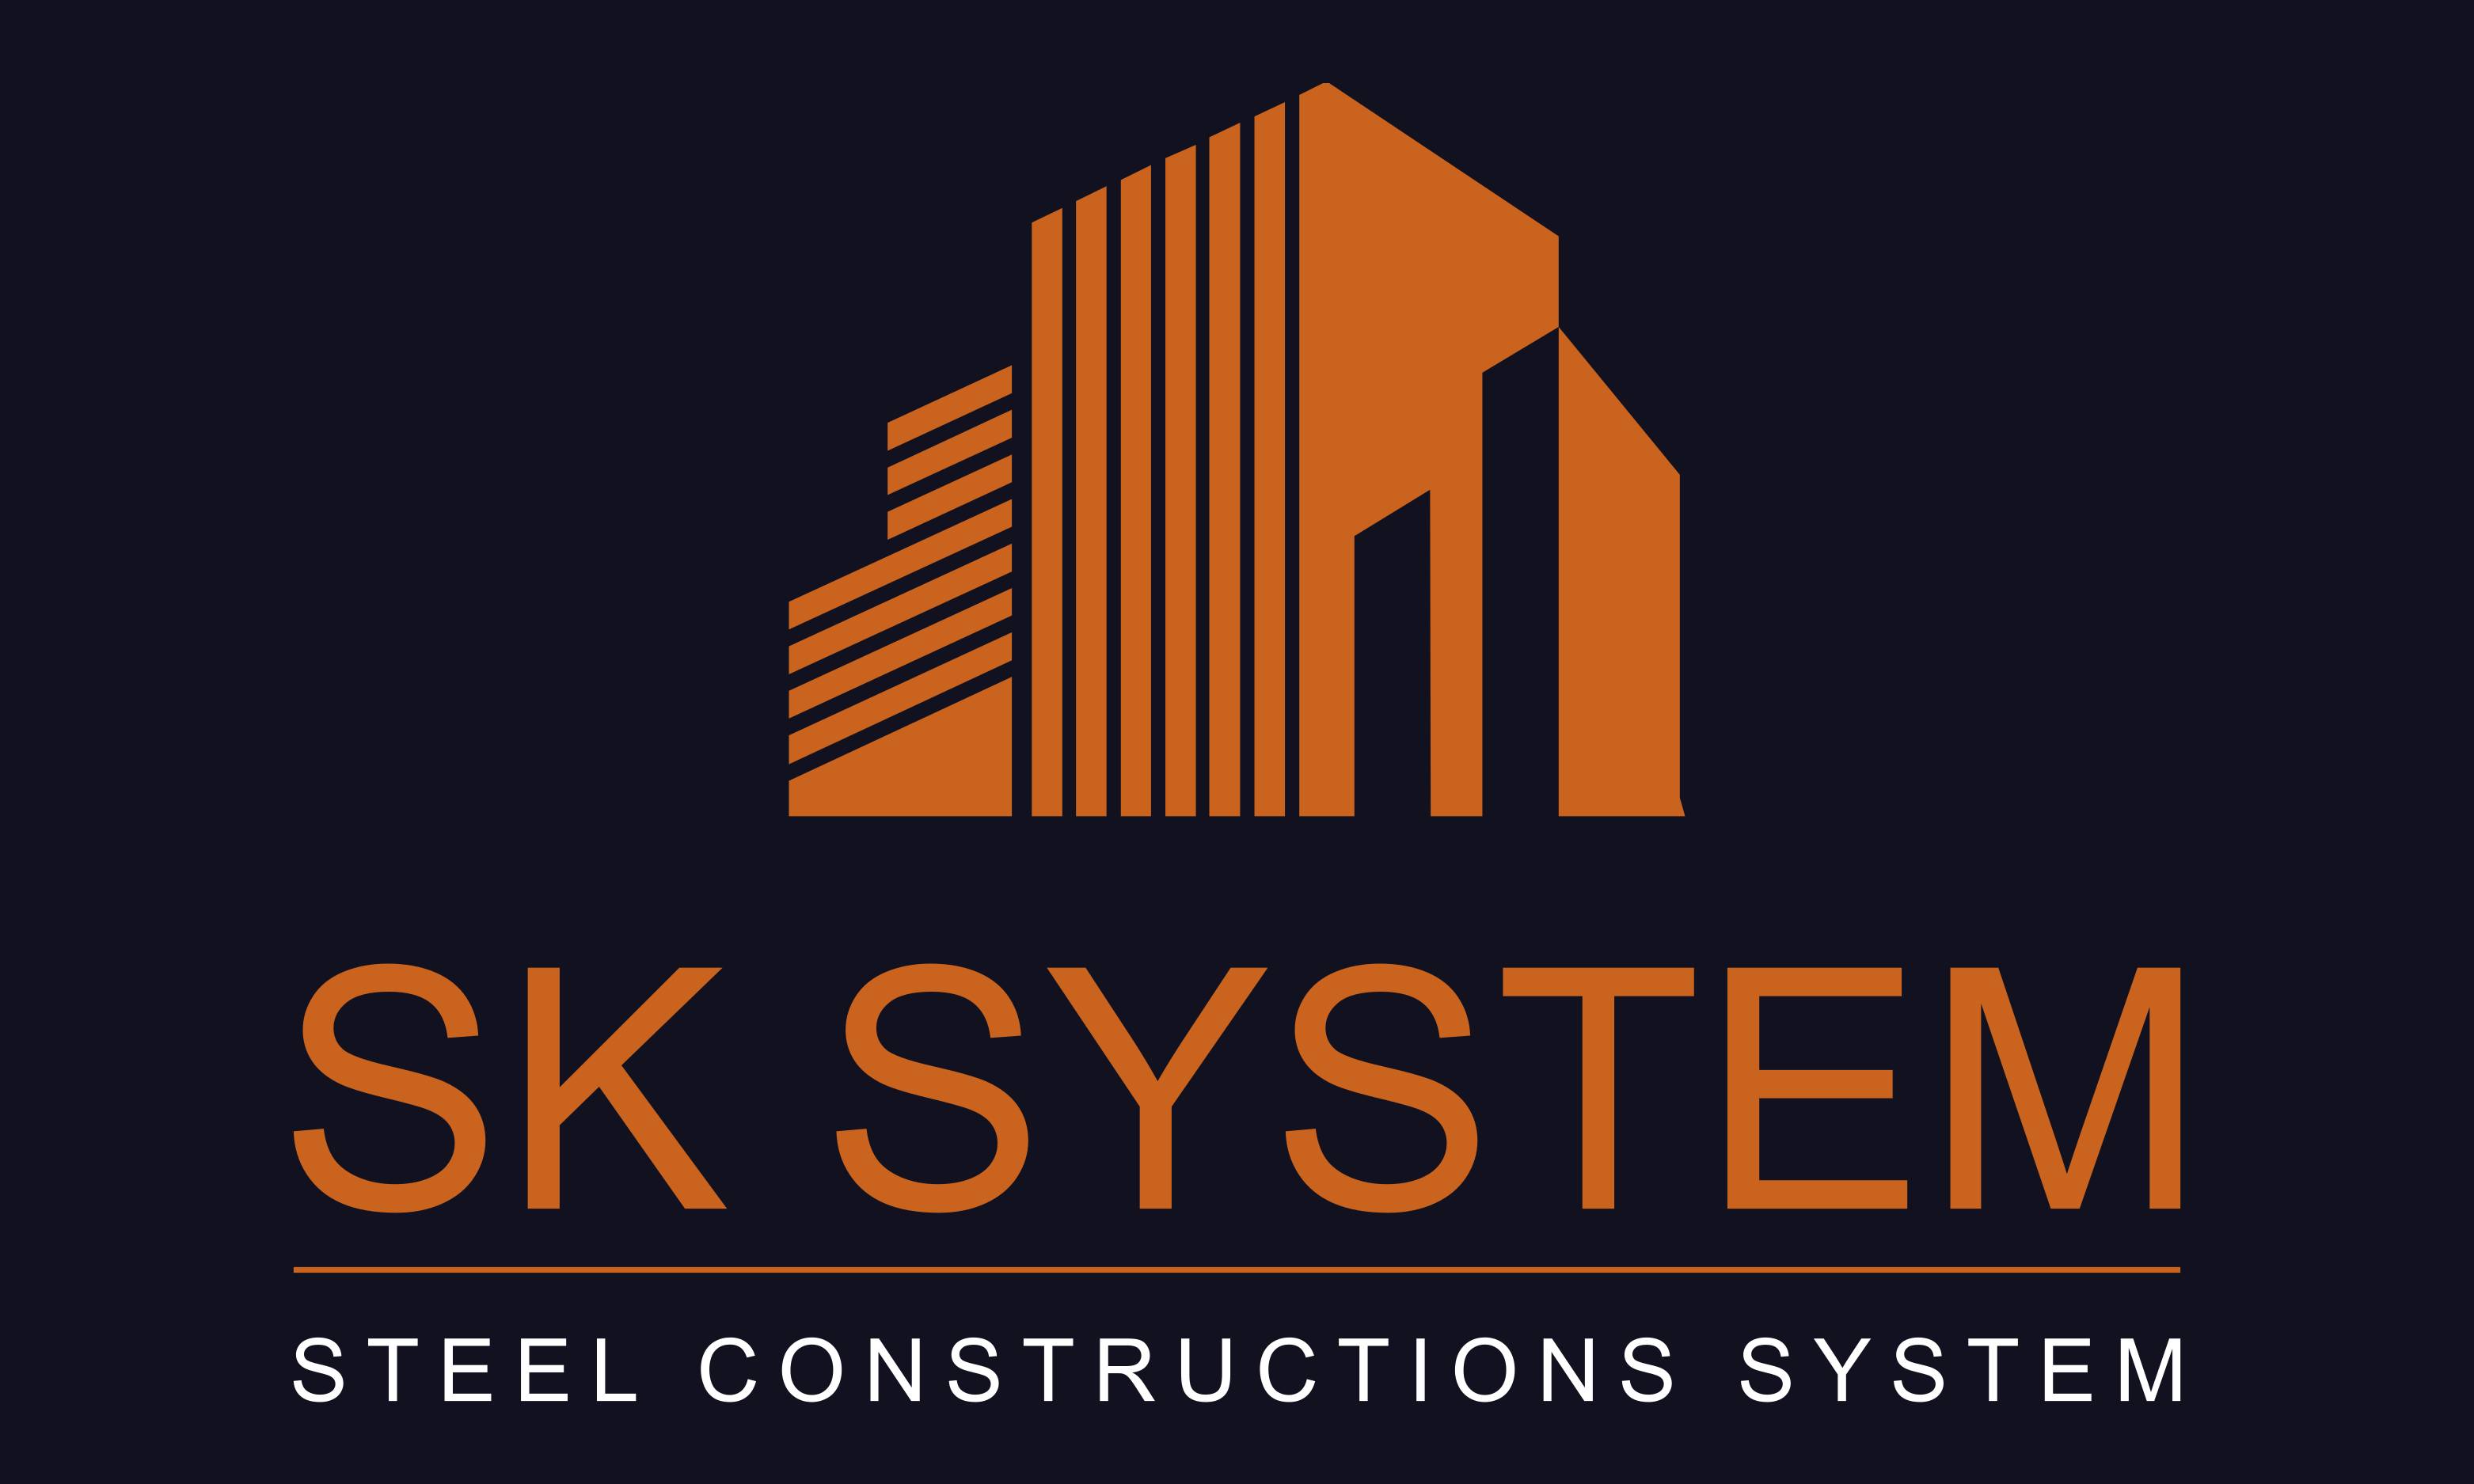 SK SYSTEM steel constructions system Damian Kupczyk